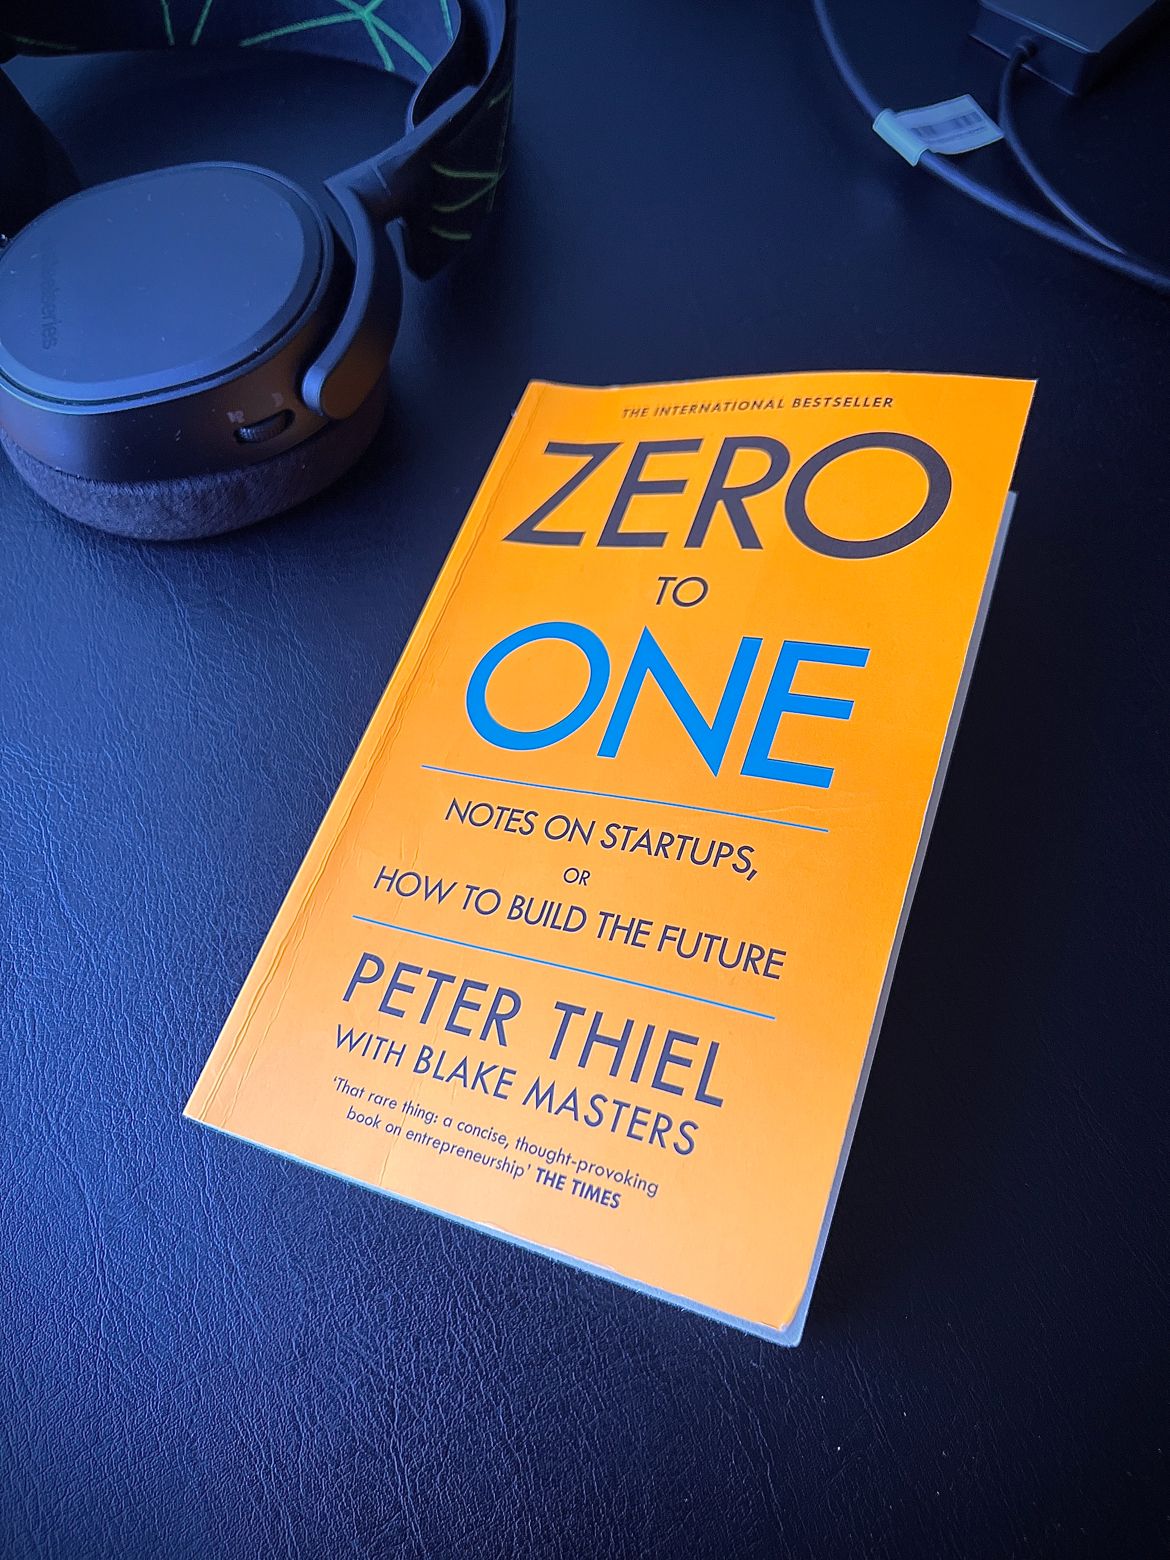 Zero to One: Notes on Startups, or How to Build the Future - Peter Thiel